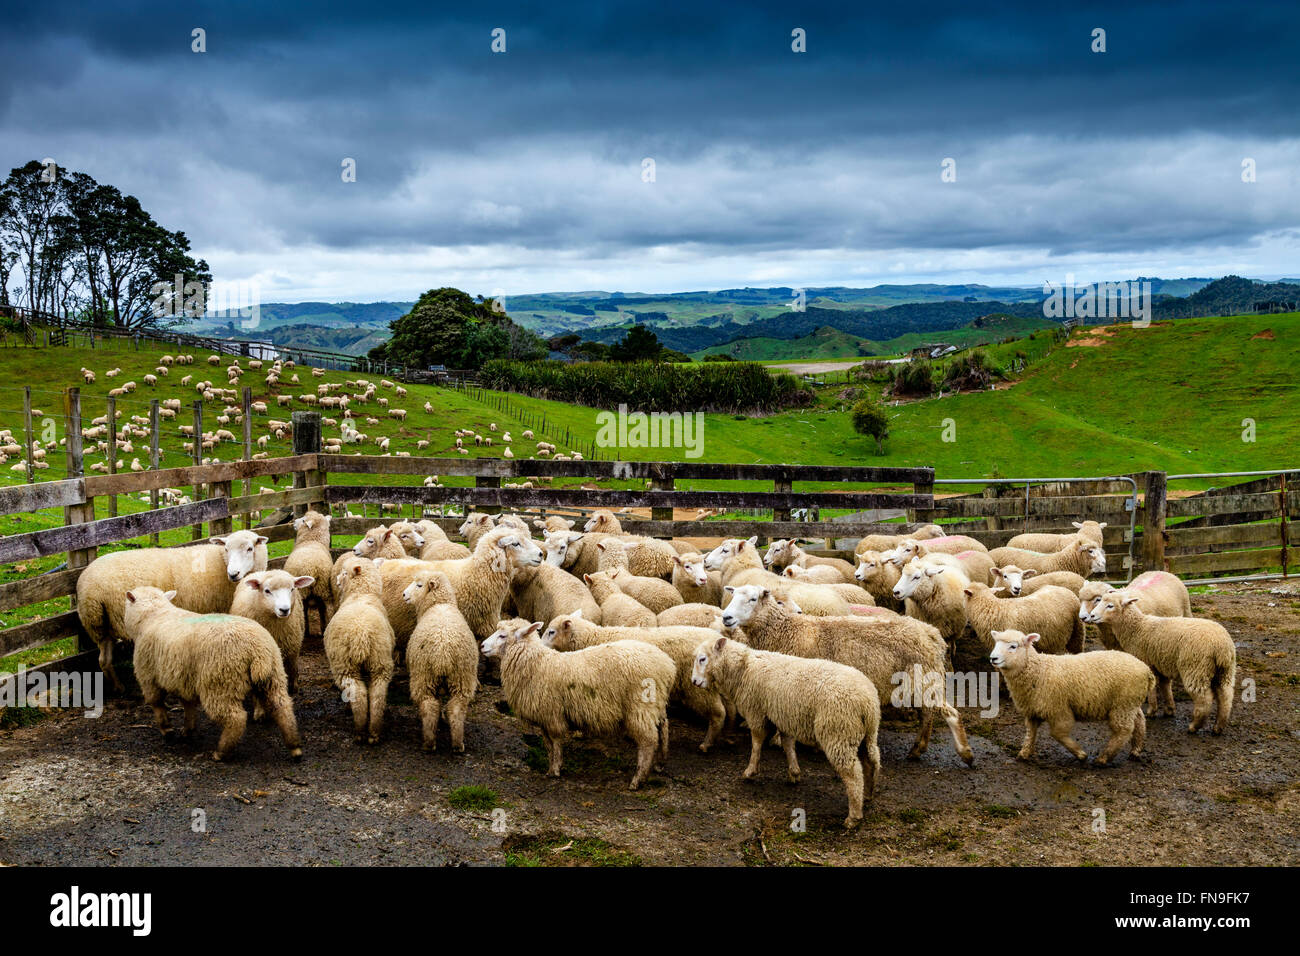 Indiener De stad kant Sheep In A Pen Waiting To Be Sheared, Sheep Farm, Pukekohe, New Zealand  Stock Photo - Alamy